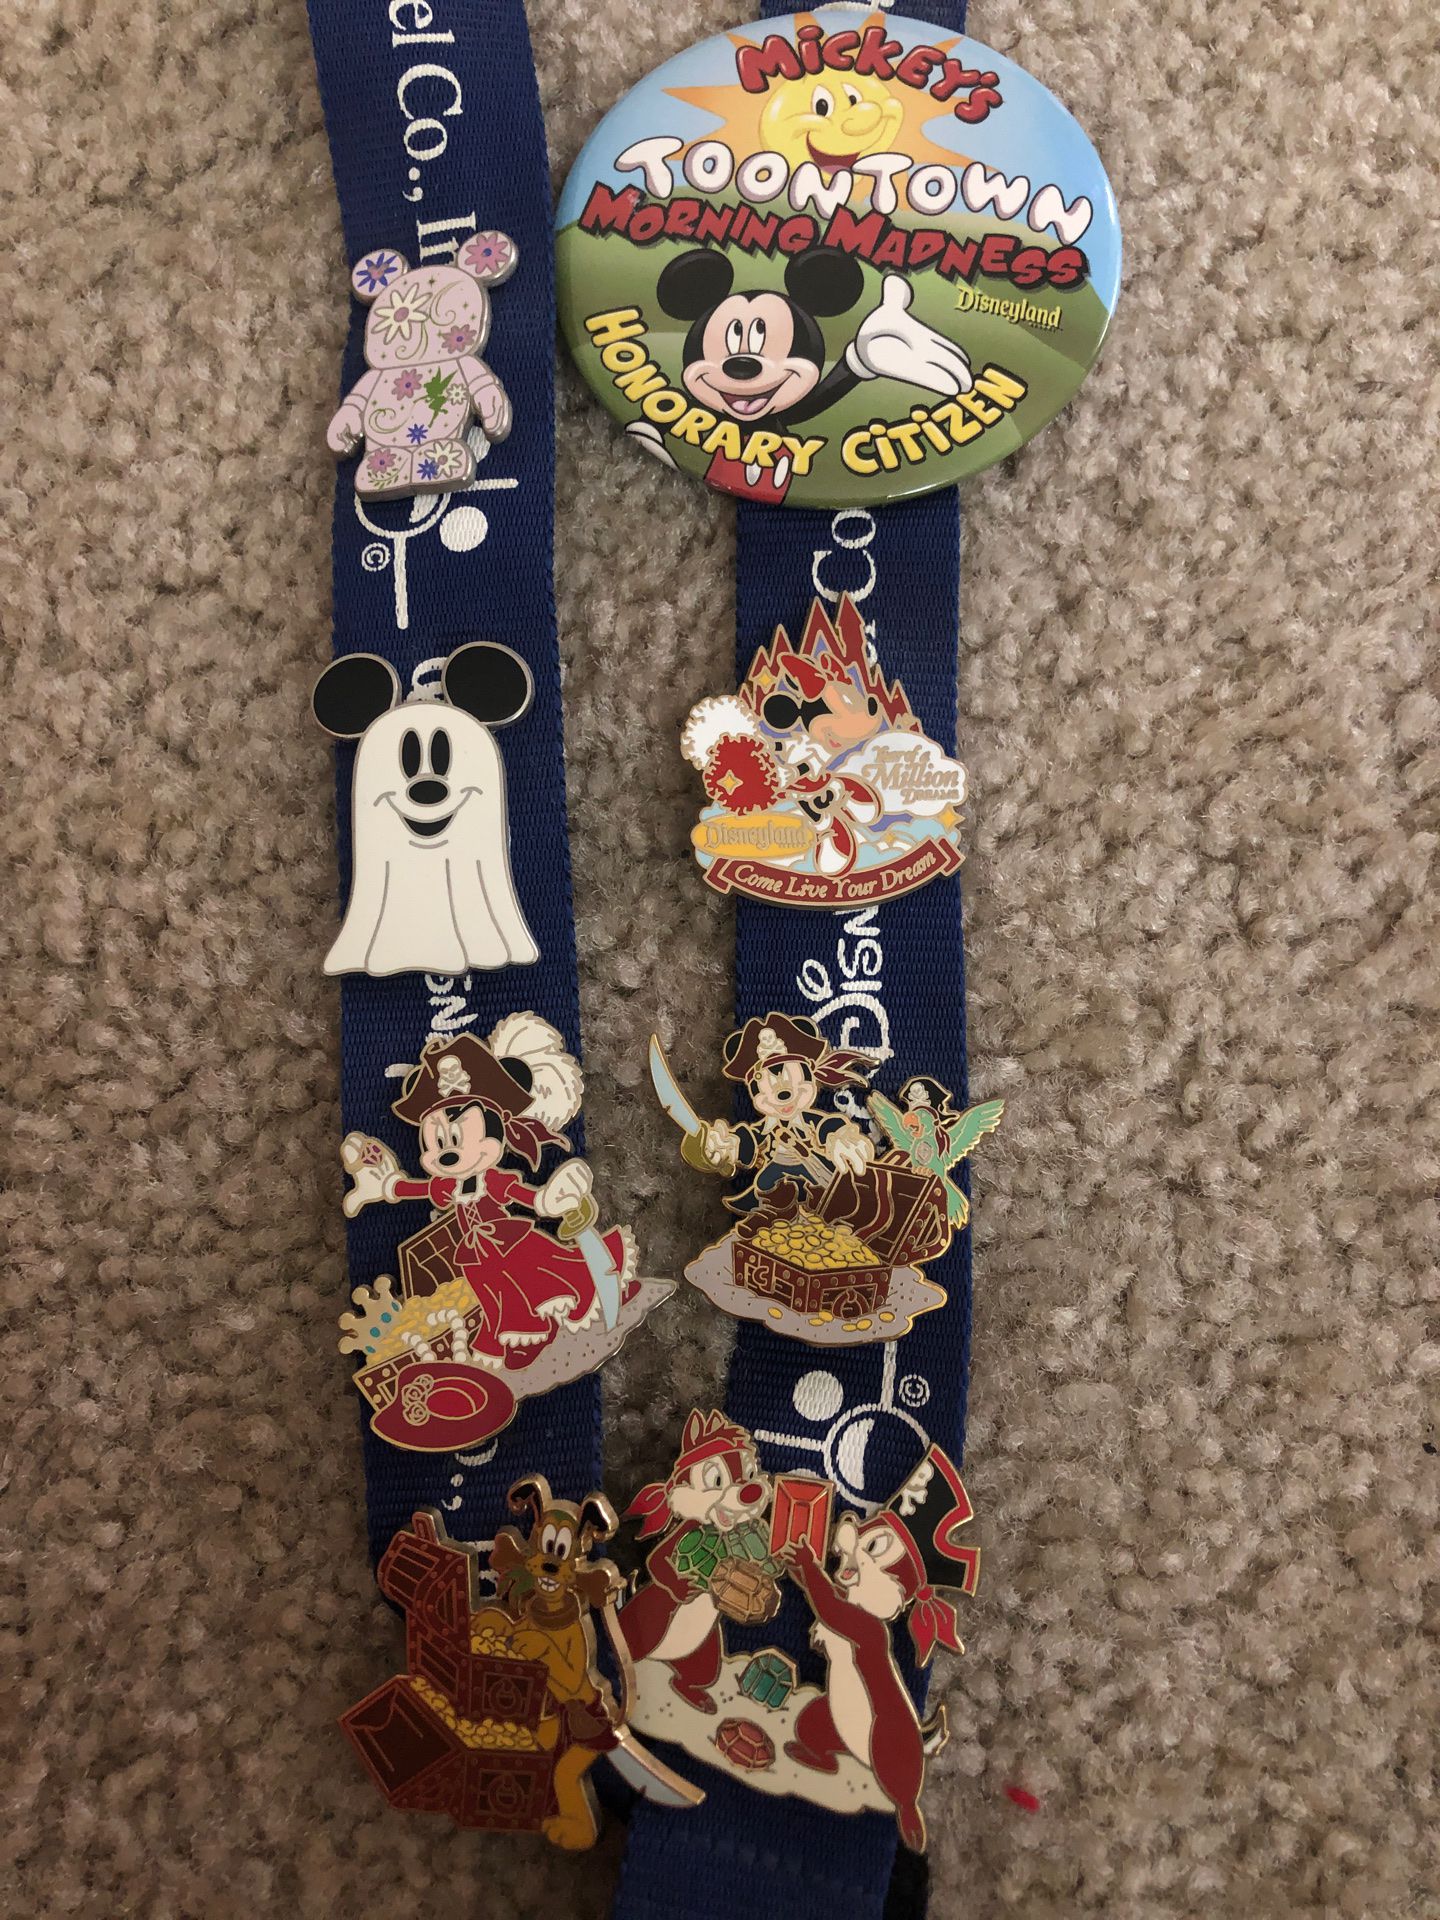 Disney Collectible Trading Pins - from Disneyland